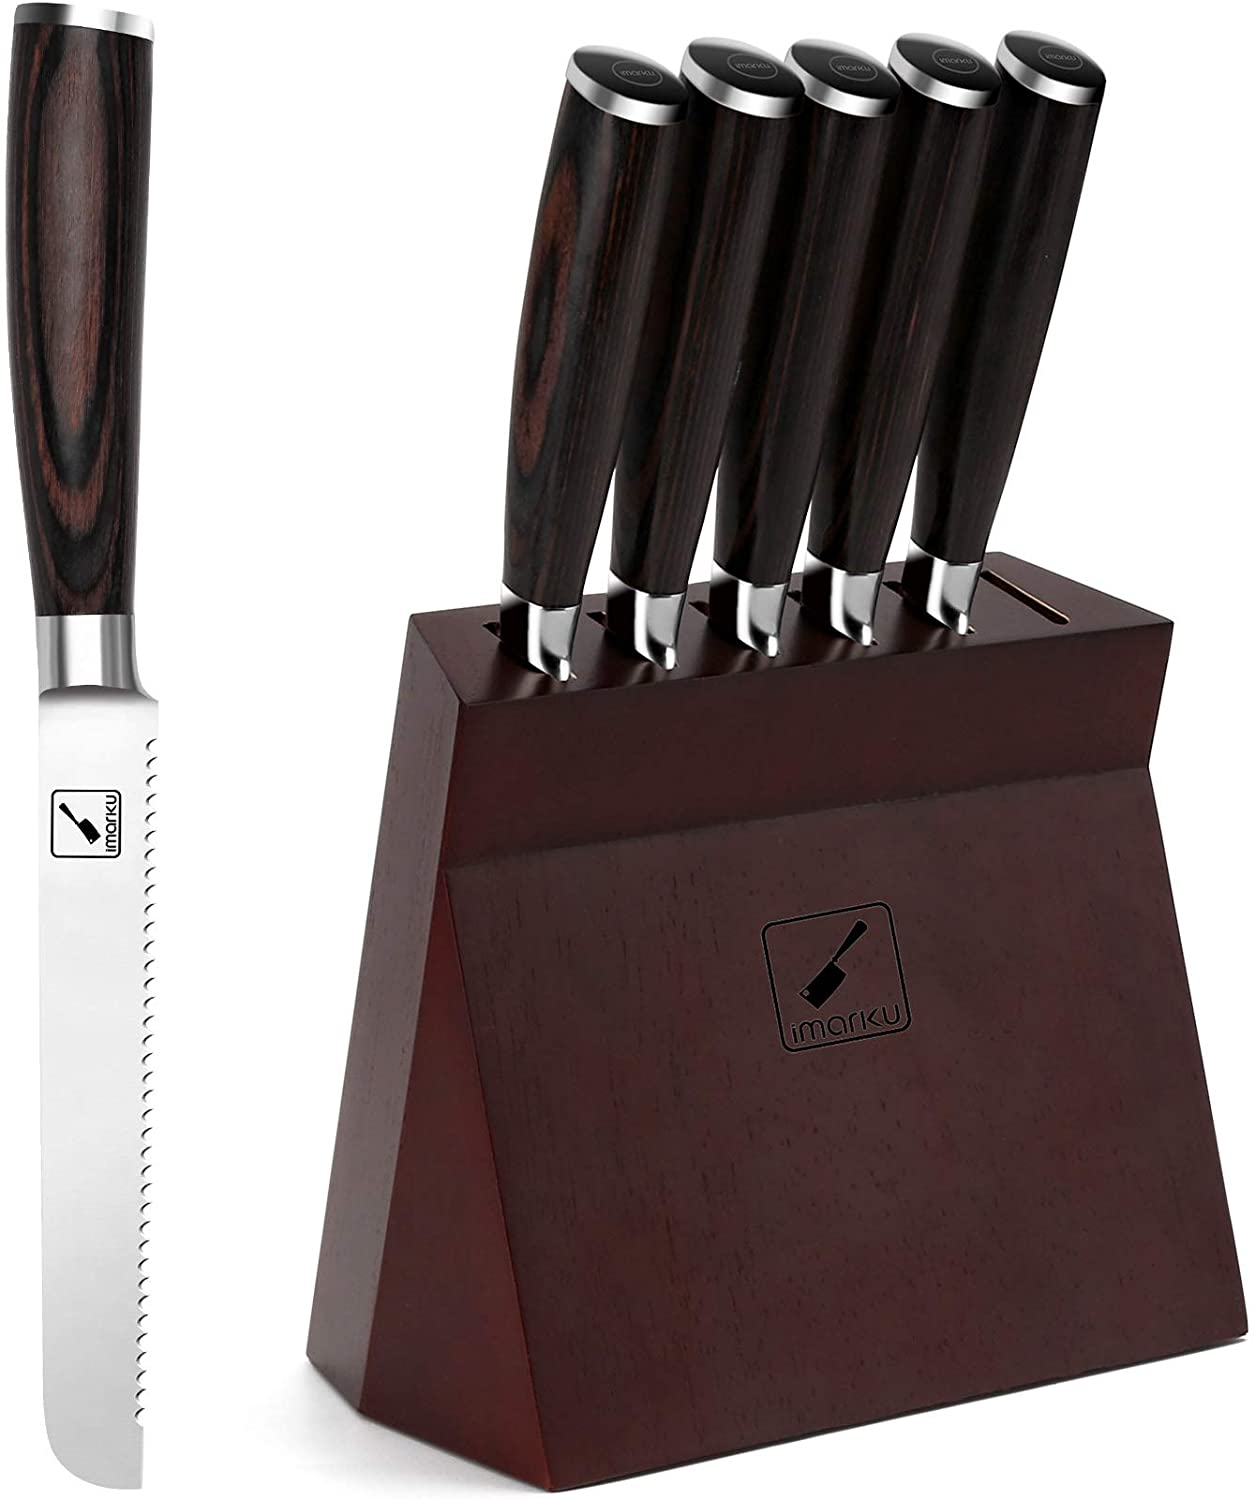 https://www.wideopencountry.com/wp-content/uploads/sites/4/eats/2021/03/Steak-Knives-Set-of-6imarku-Serrated-Steak-Knives-with-BlockHigh-Carbon-Stainless-Steel-Steak-Knife-Set-with-Pakkawood-Handle.jpg?resize=1255%2C1500